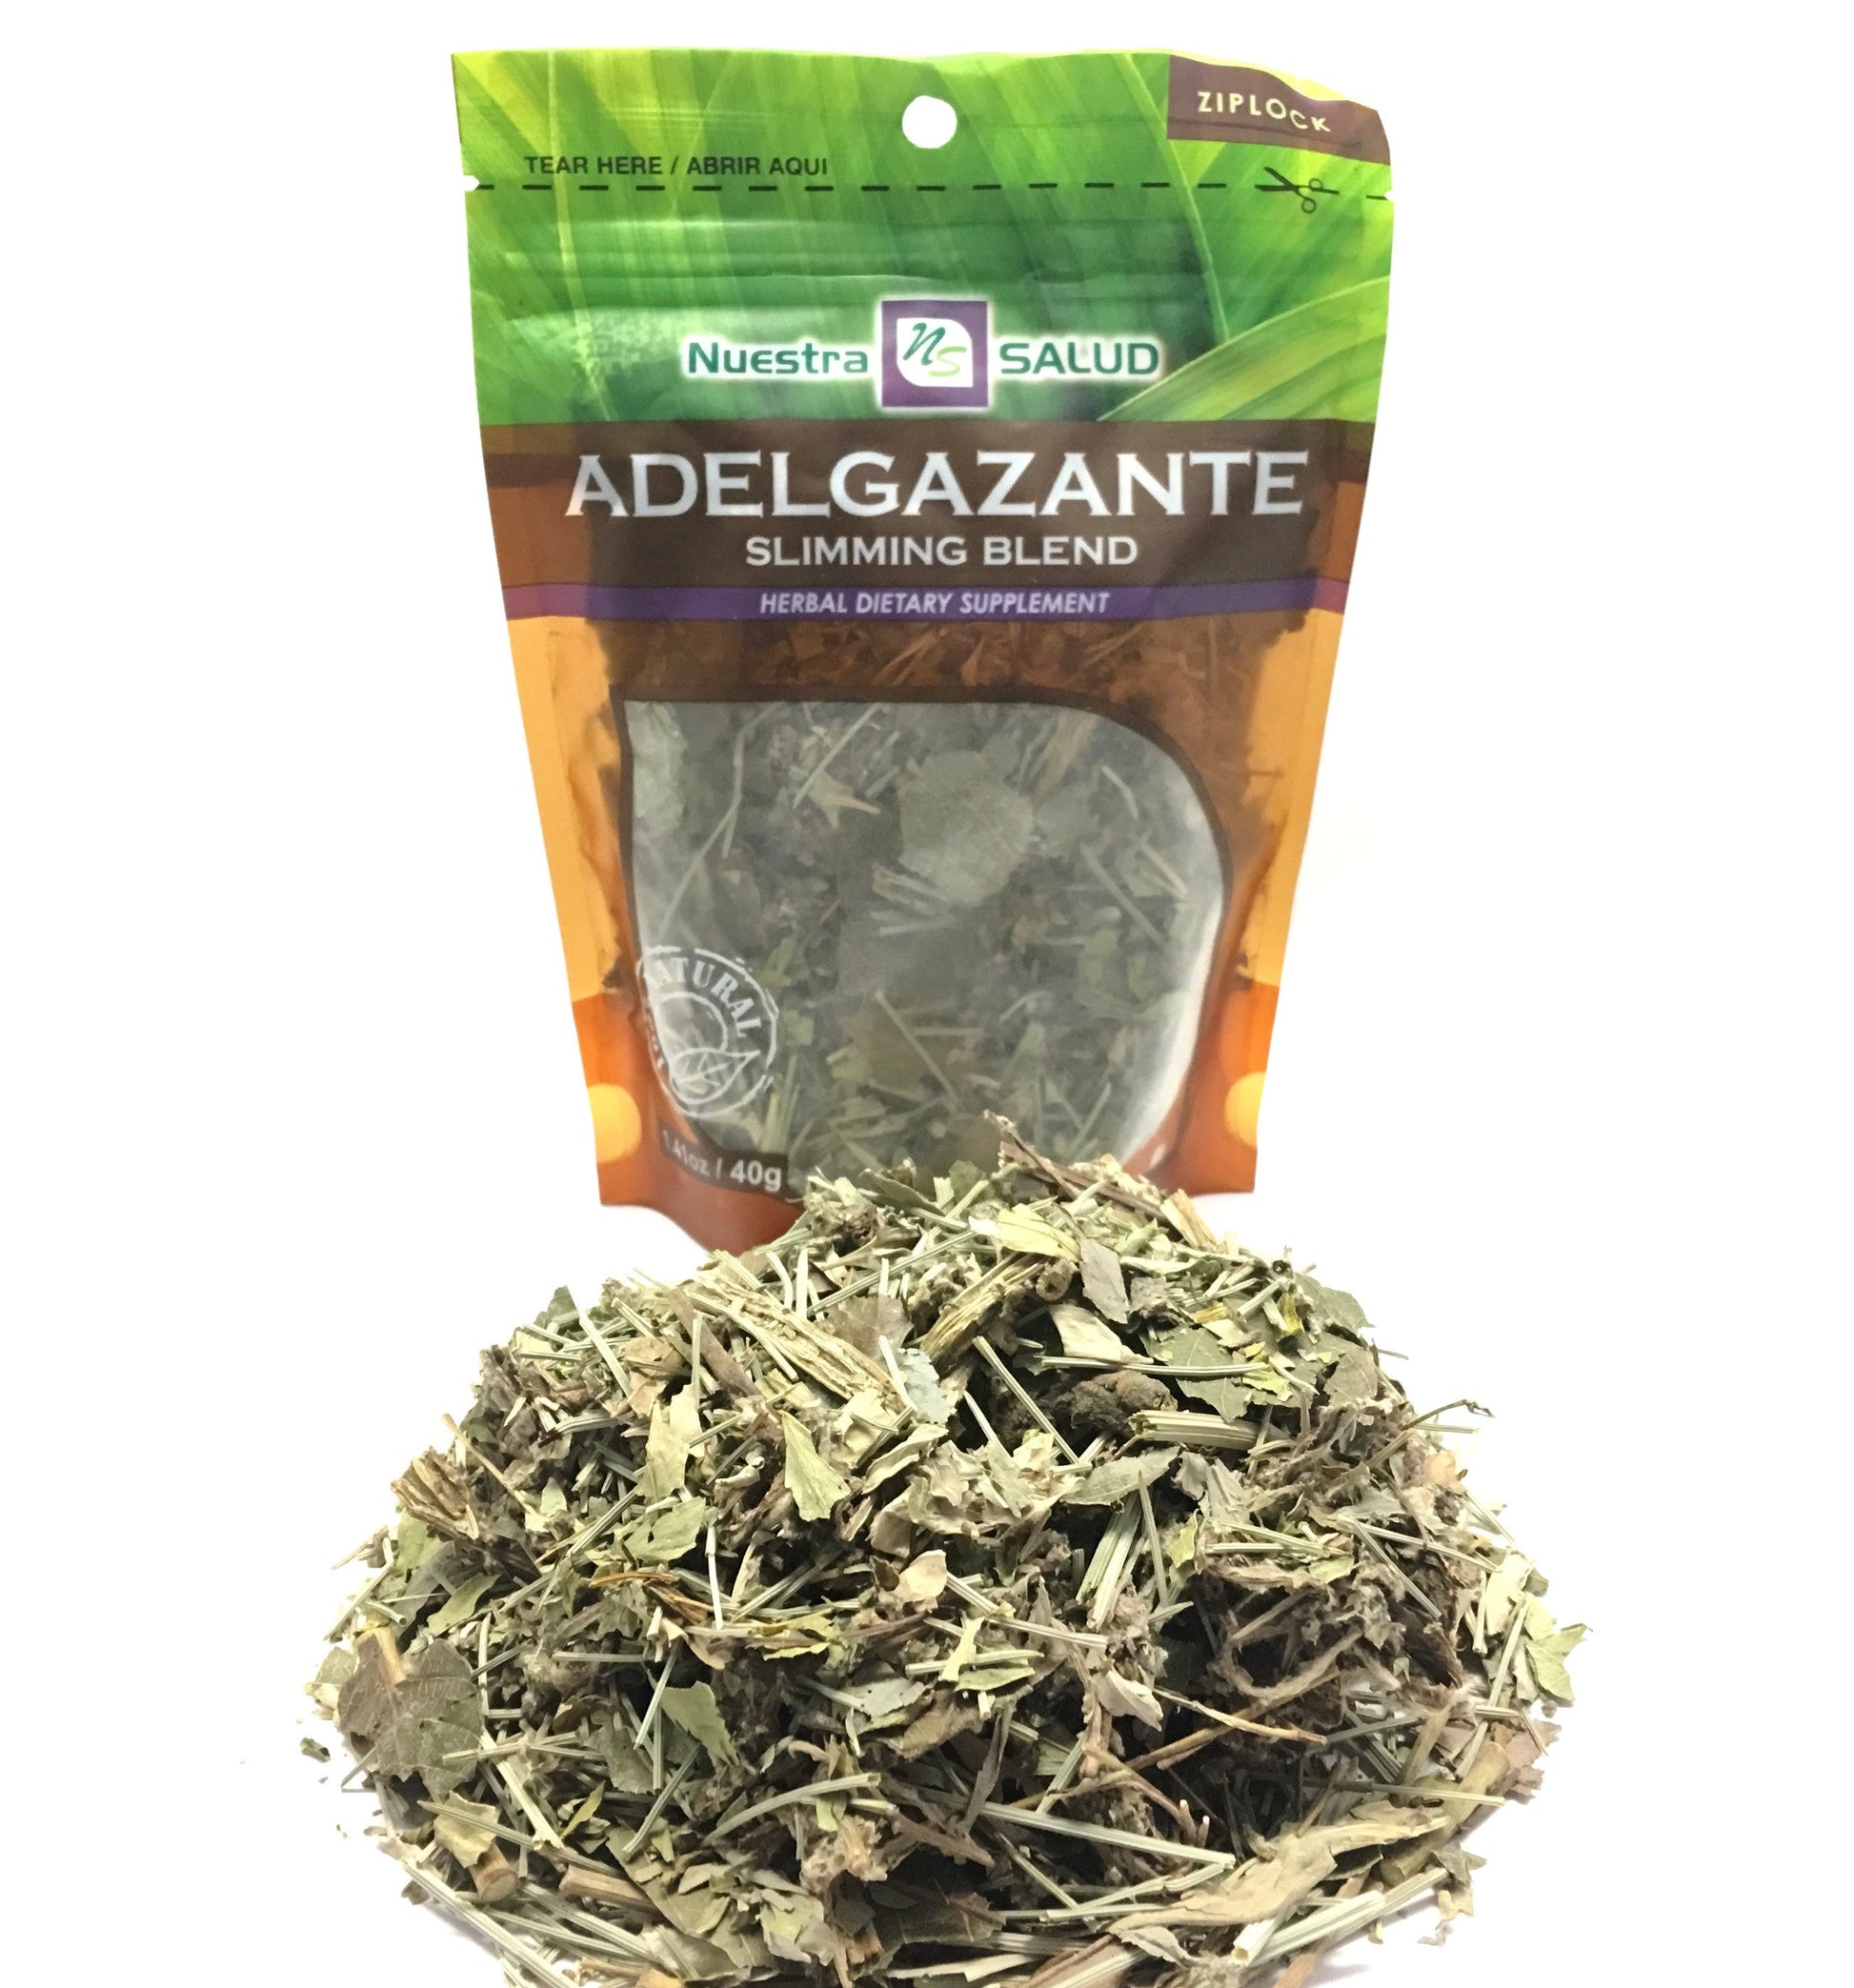  Adelgazante Slimming Blend Loose Herbal Infusion Tea Value Pack (120g) by Nuestra Salud sold by NS Herbs Co.